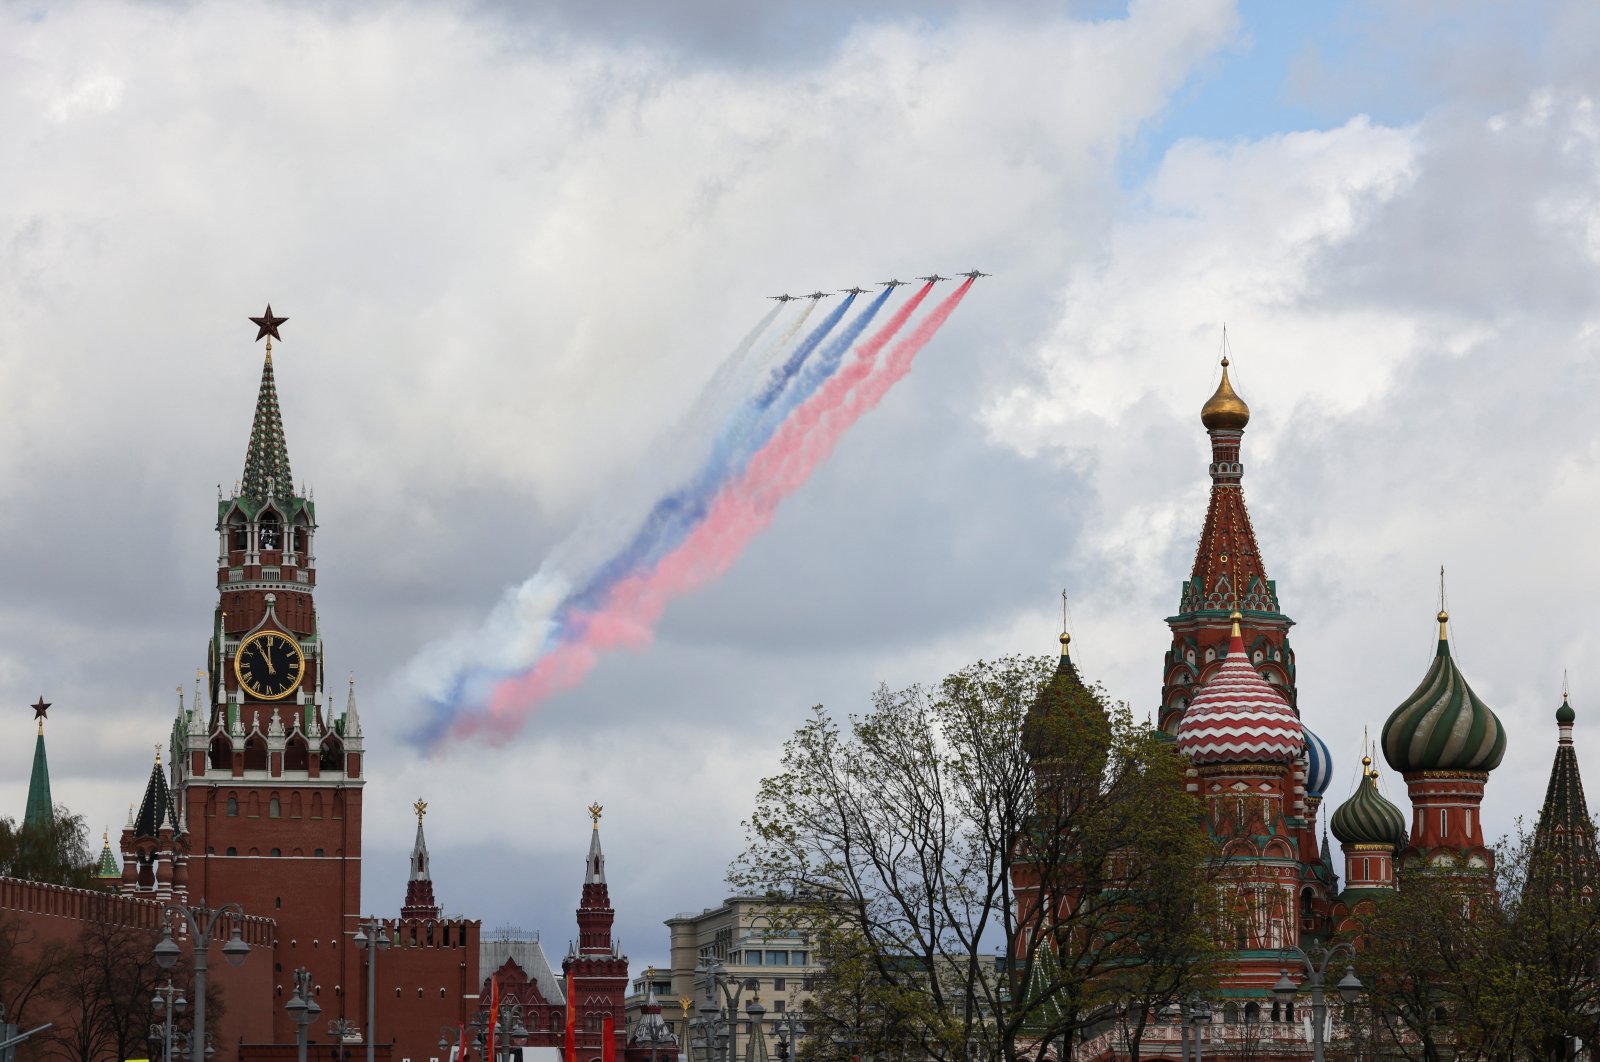 Russian Su-25 jet aircraft release smoke in the colors of the Russian state flag above the Kremlin and St. Basil&#039;s Cathedral during a rehearsal for the flypast, which is part of a military parade marking the anniversary of the victory over Nazi Germany in the World War II, in central Moscow, Russia, May 4, 2022. (Reuters Photo)